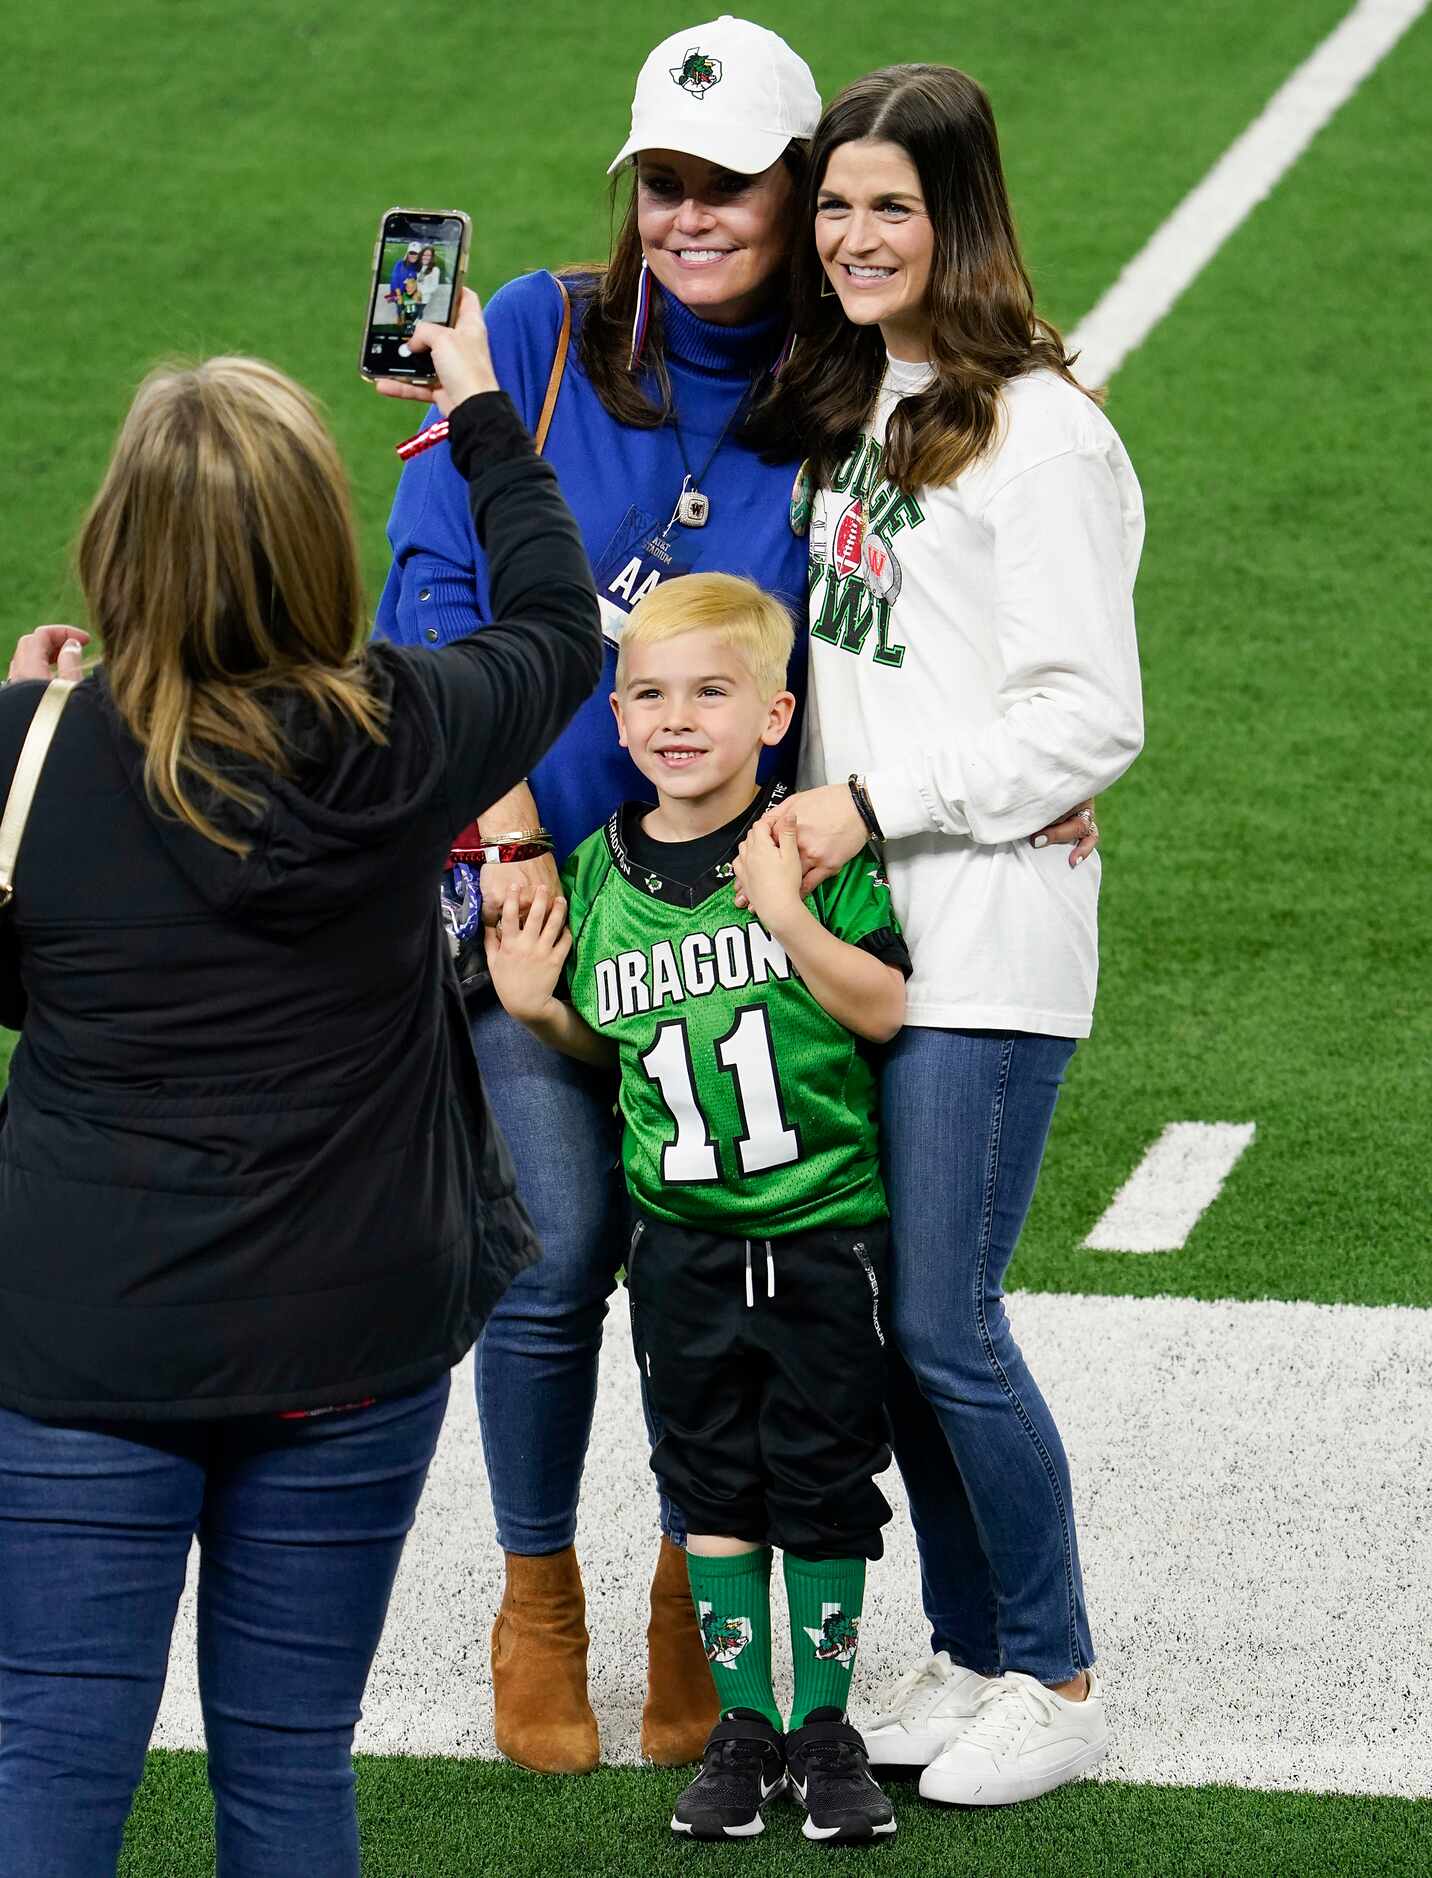 Elizabeth Dodge poses on the field with her grandson Tate, 5, and daughter-in-law Alexis...